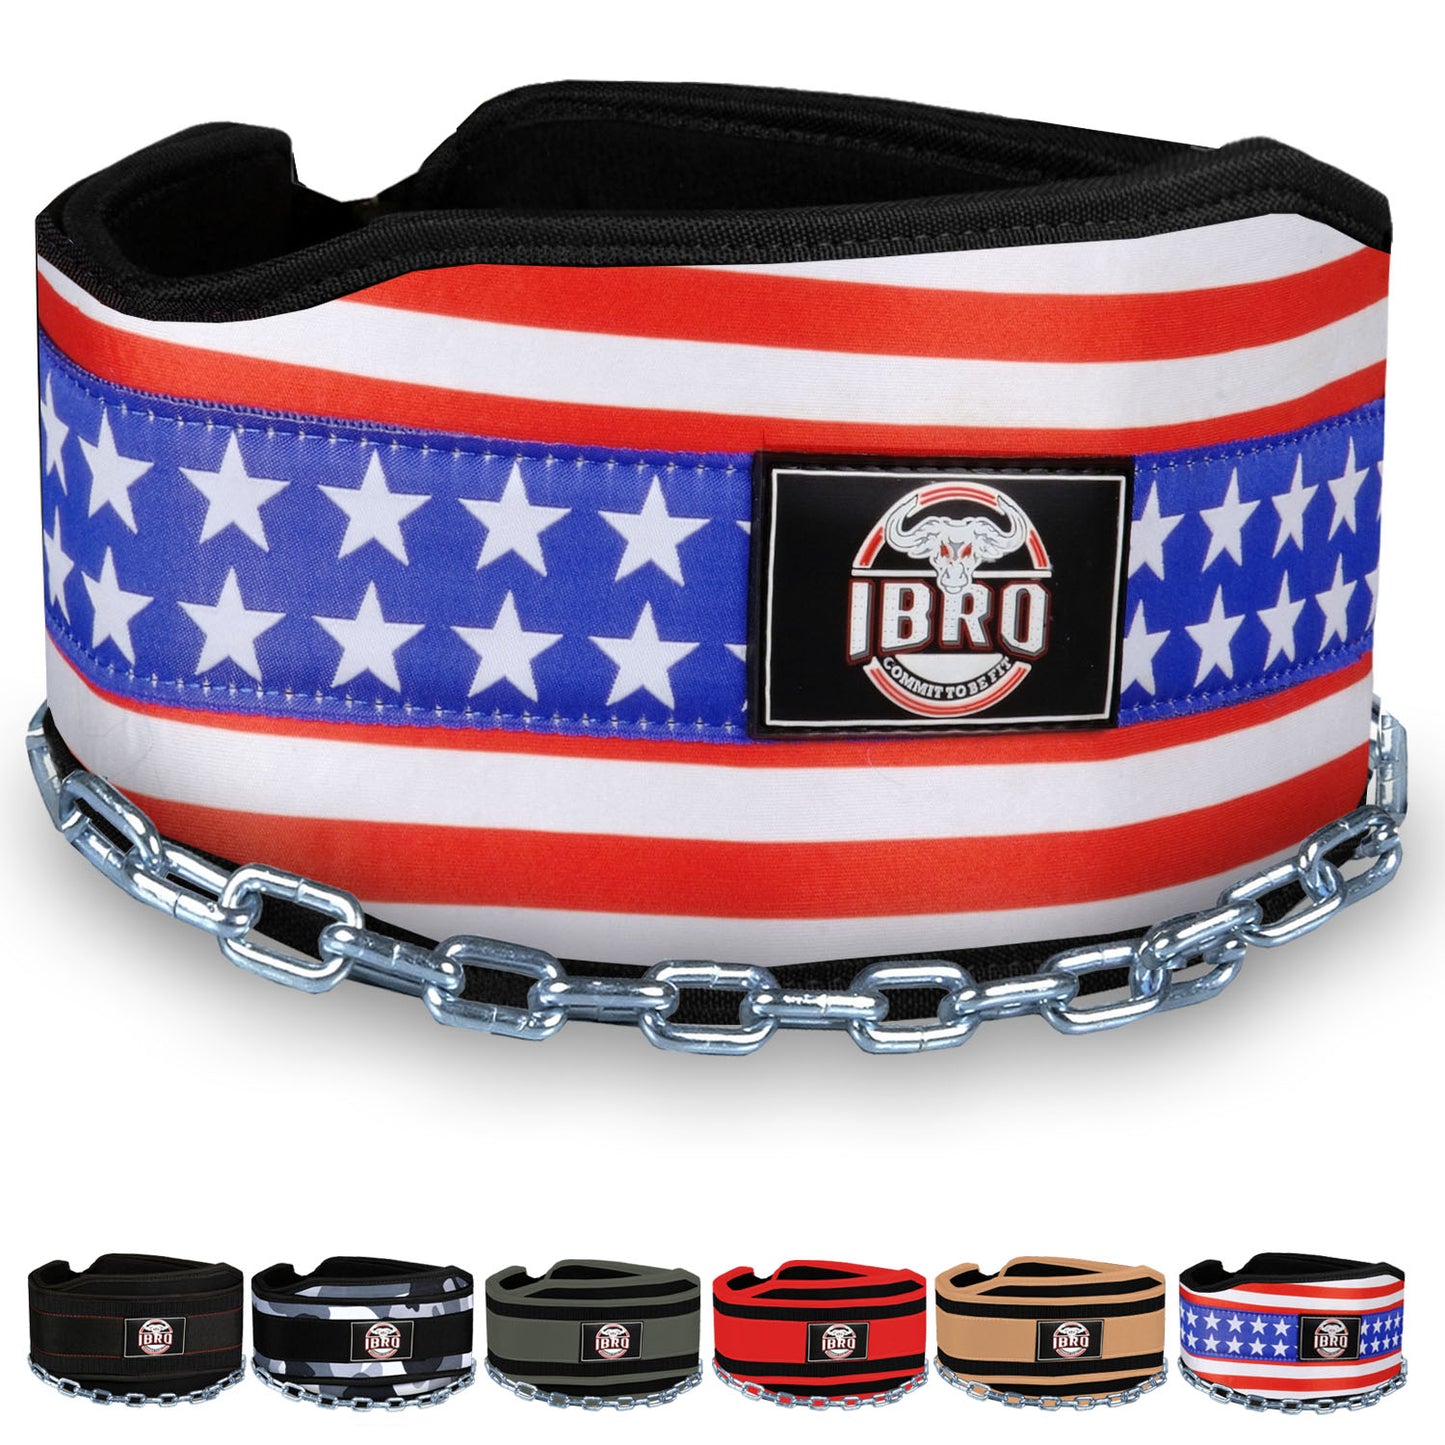 IBRO Advanced Fitness Dipping Belt with heavy Duty Long Steel Chain | Weighted Dips, Pullups, Bodybuilding, Weight Lifting | Neoprene Waist Support | for Men and Women Flag